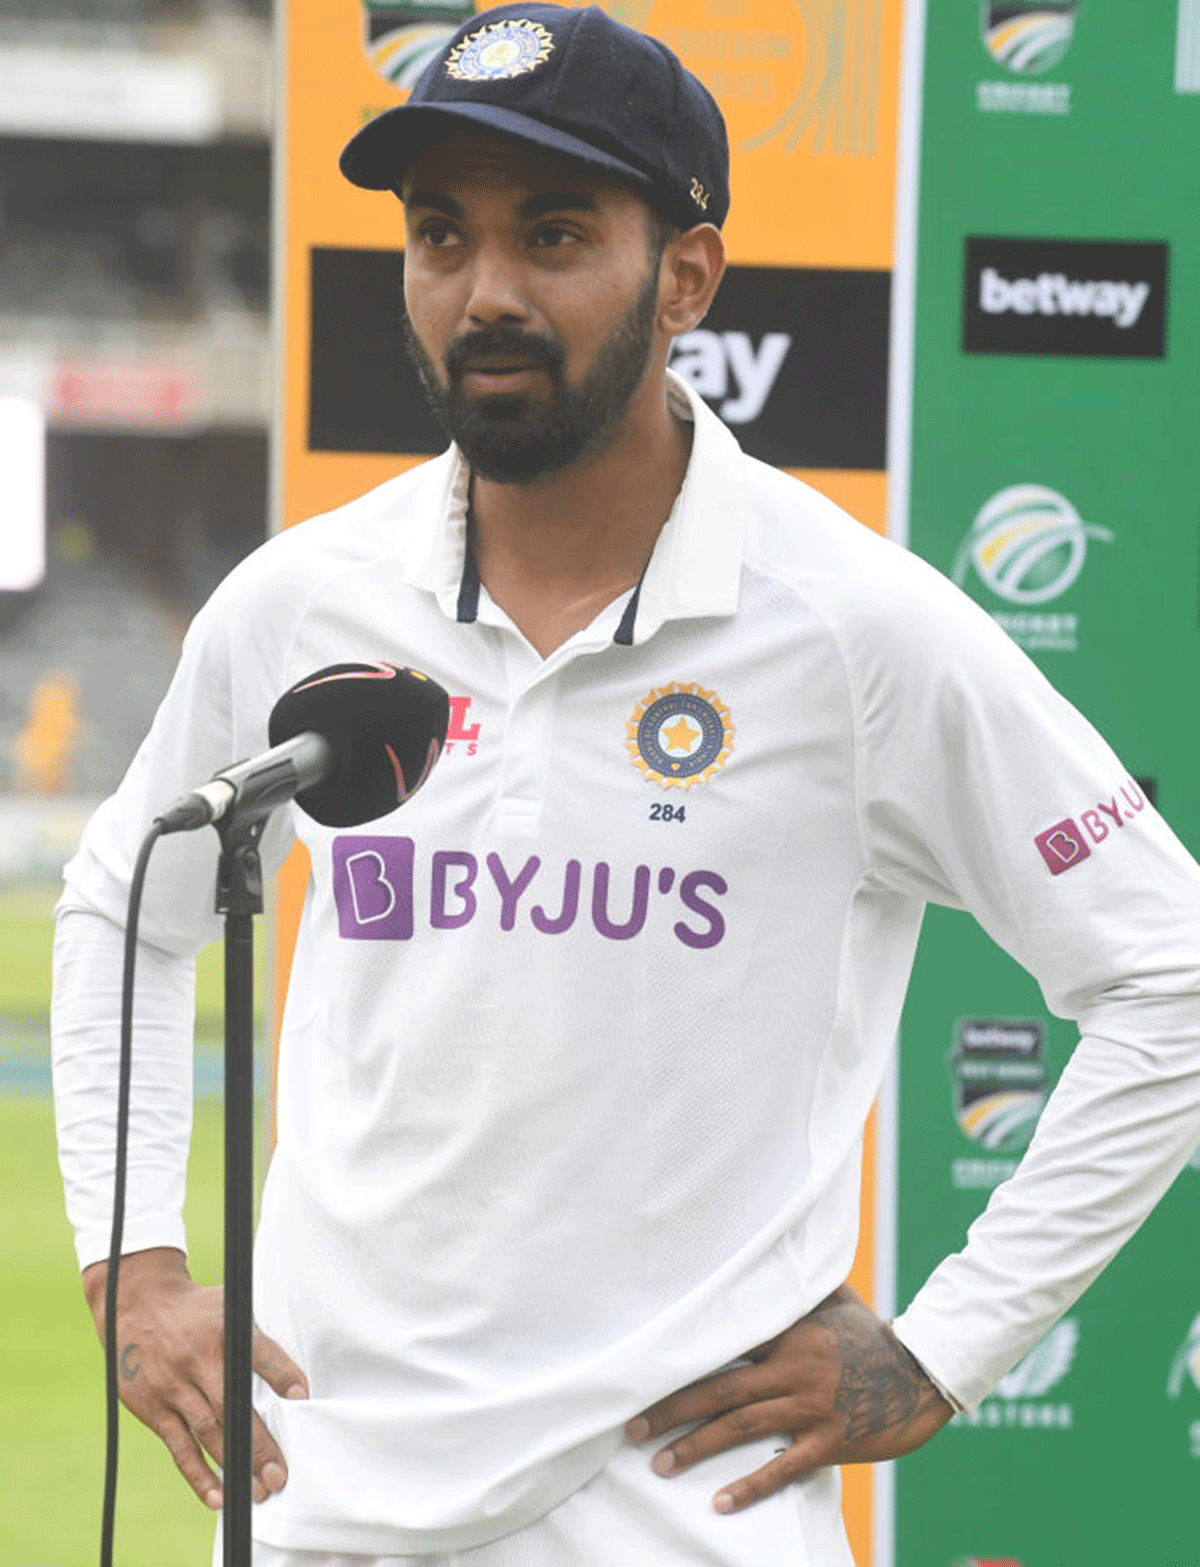 India's stand-in skipper was candid in his assessment of India's seven-wicket loss to South Africa at the Wanderers in Johannesburg on Thursday